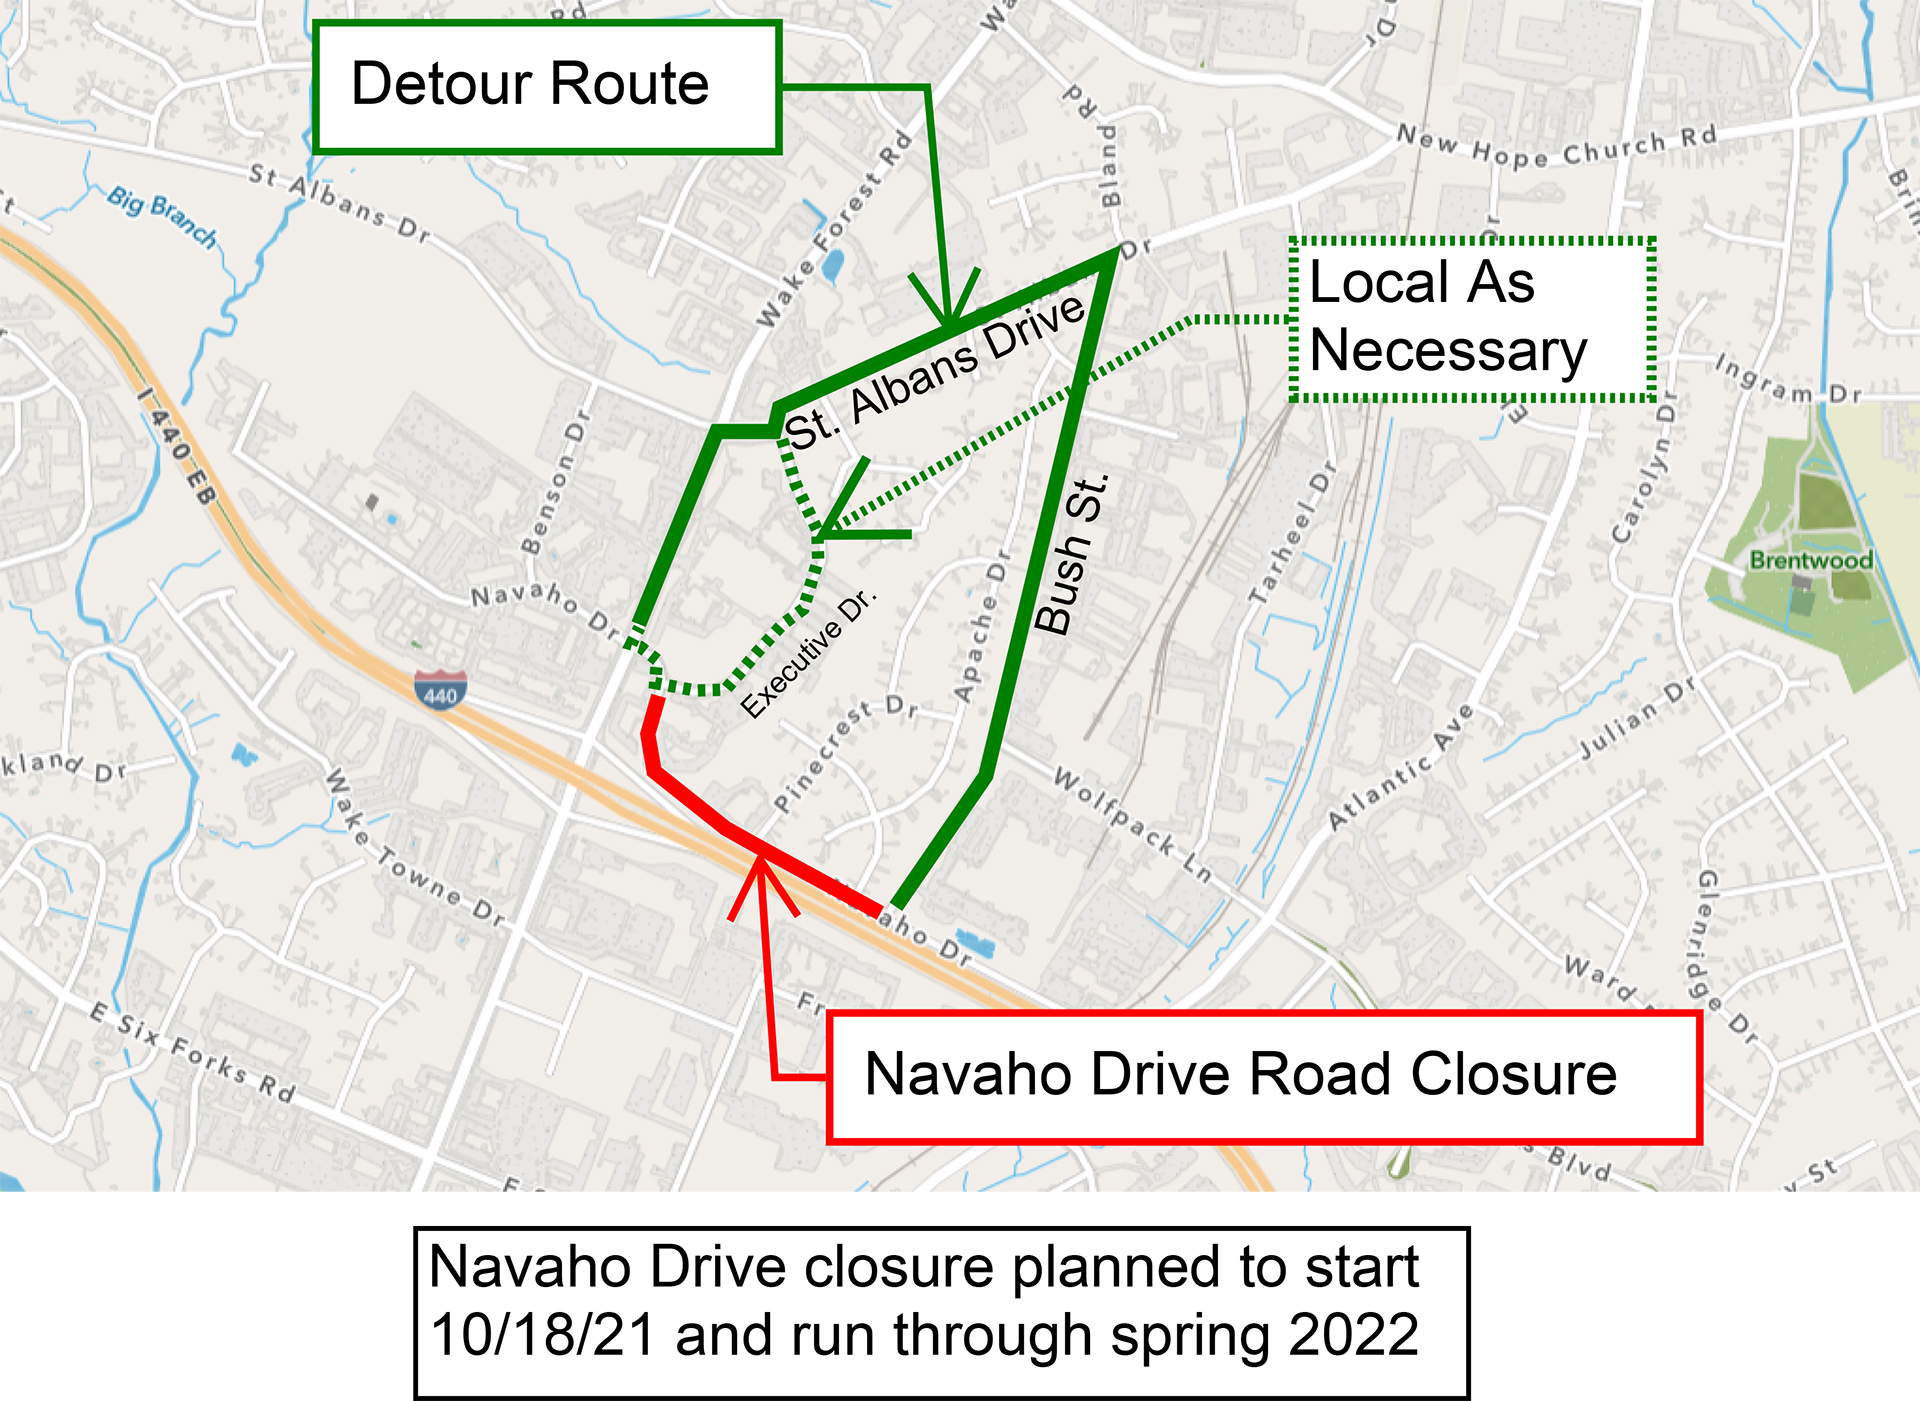 a map of the detour route - Wake Forest Road to St. ALbans Drive to Bush Street